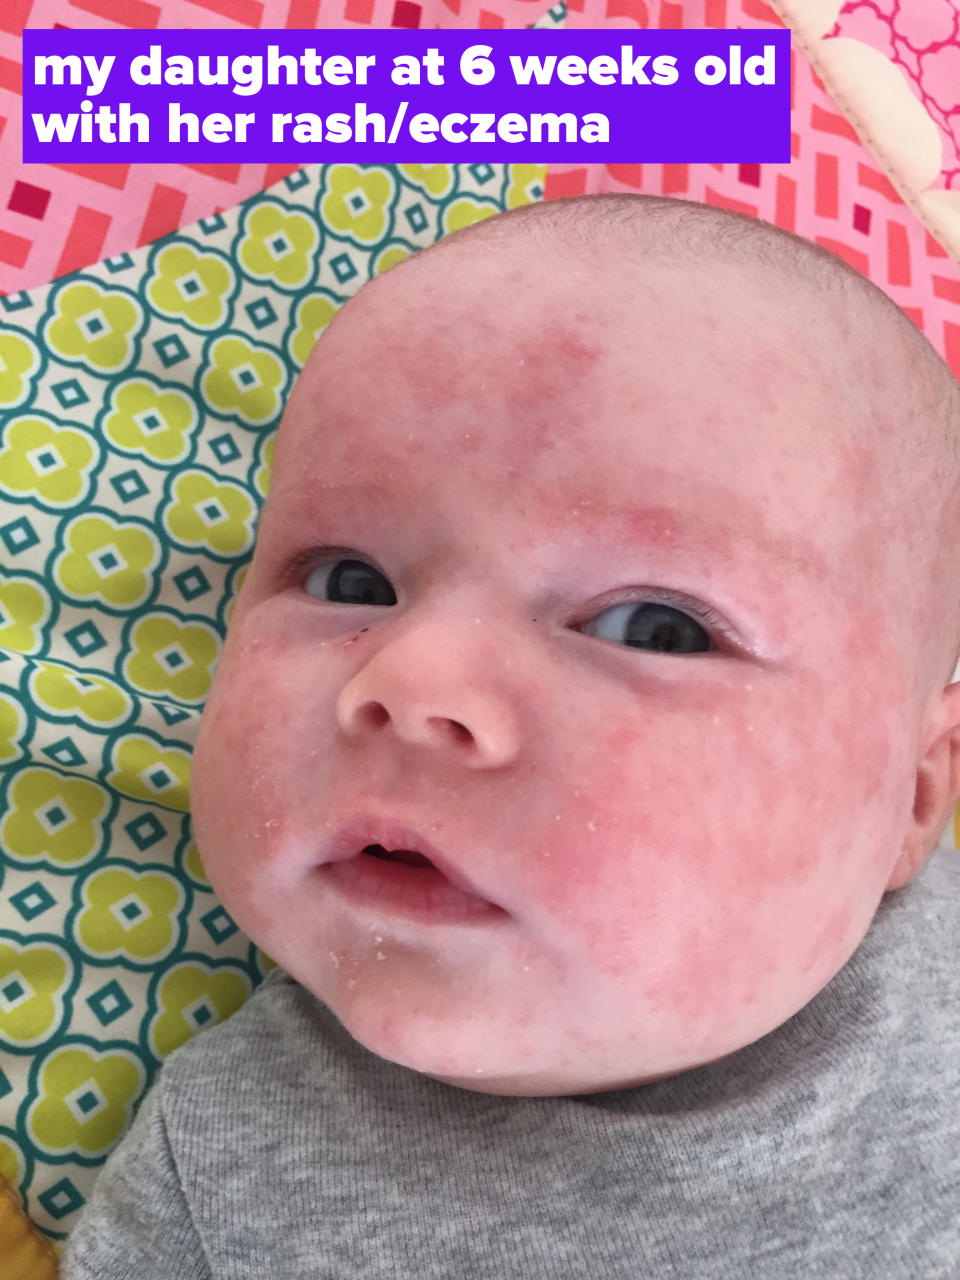 6 week old baby with splotchy, raised eczema/rash patches